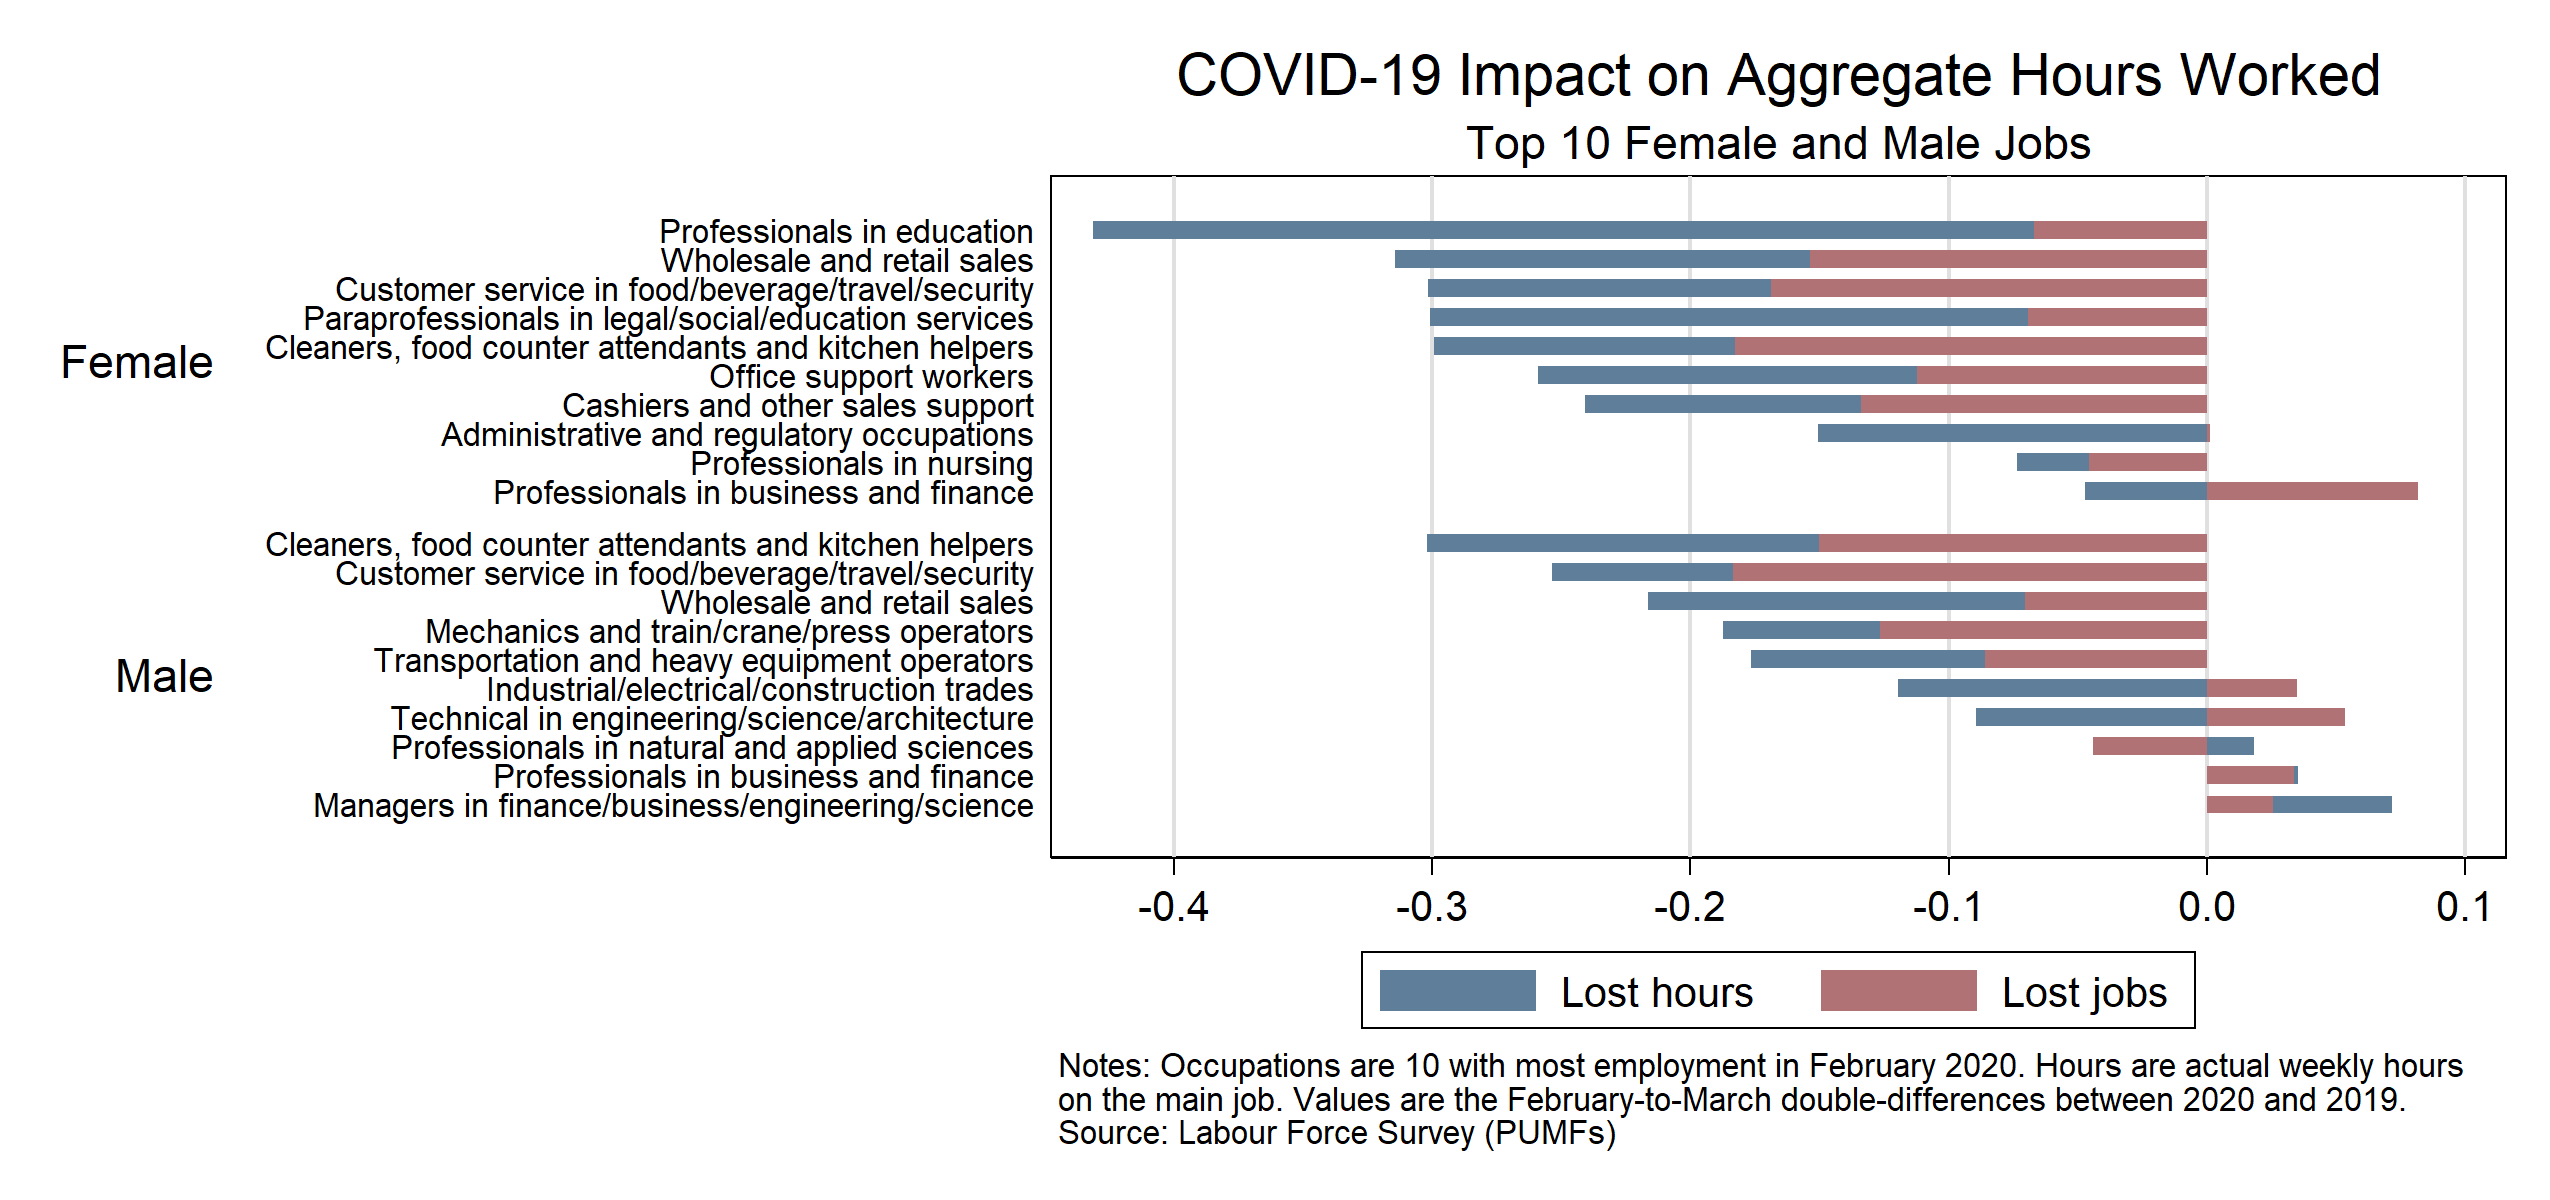 COVID-19 impact on male and female jobs